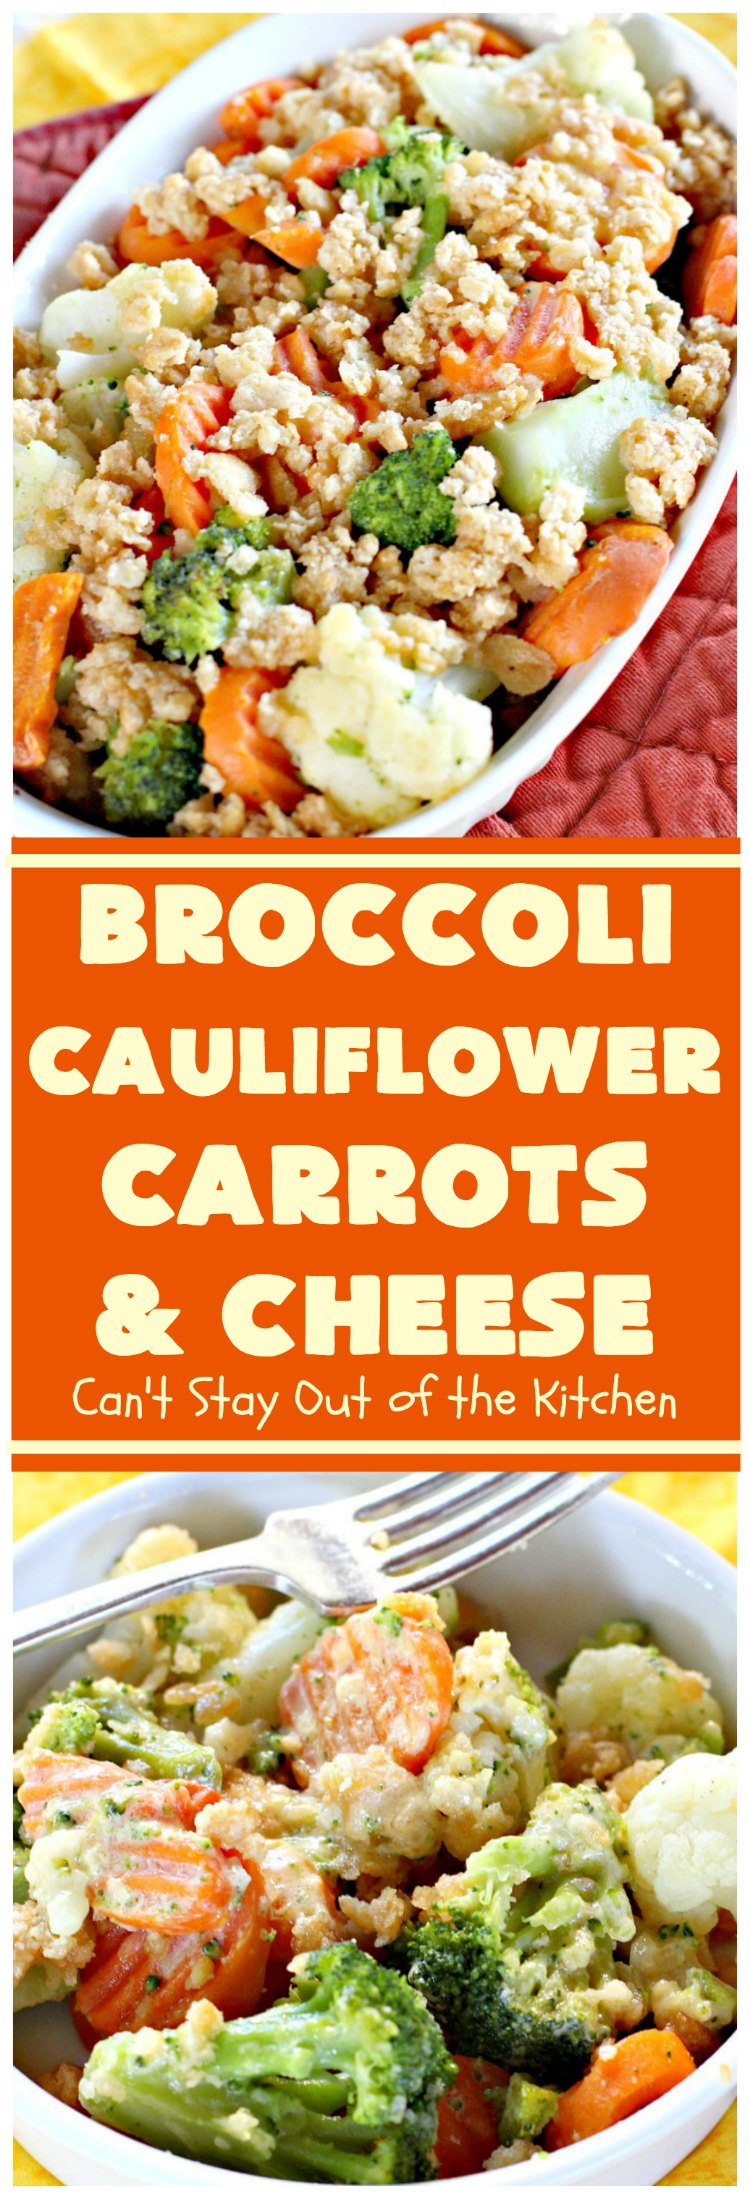 Broccoli, Cauliflower, Carrots and Cheese | Can't Stay Out of the Kitchen